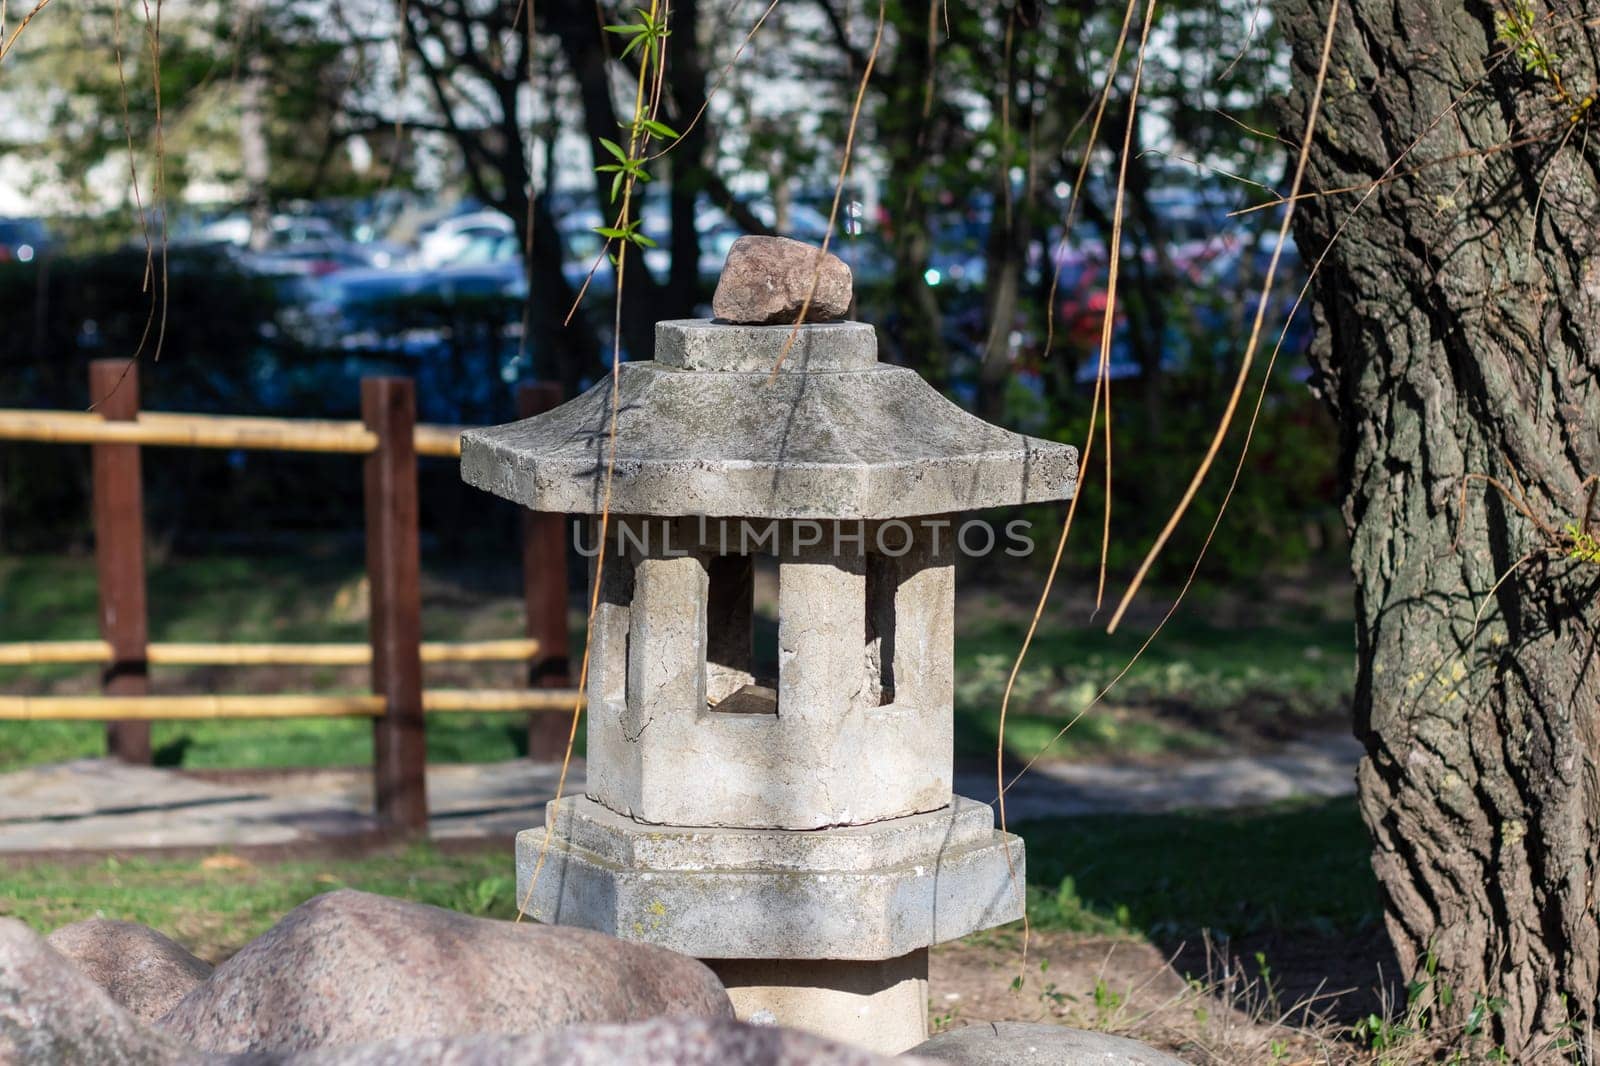 Stone lantern beside tree in park, enhancing natural landscape by Vera1703